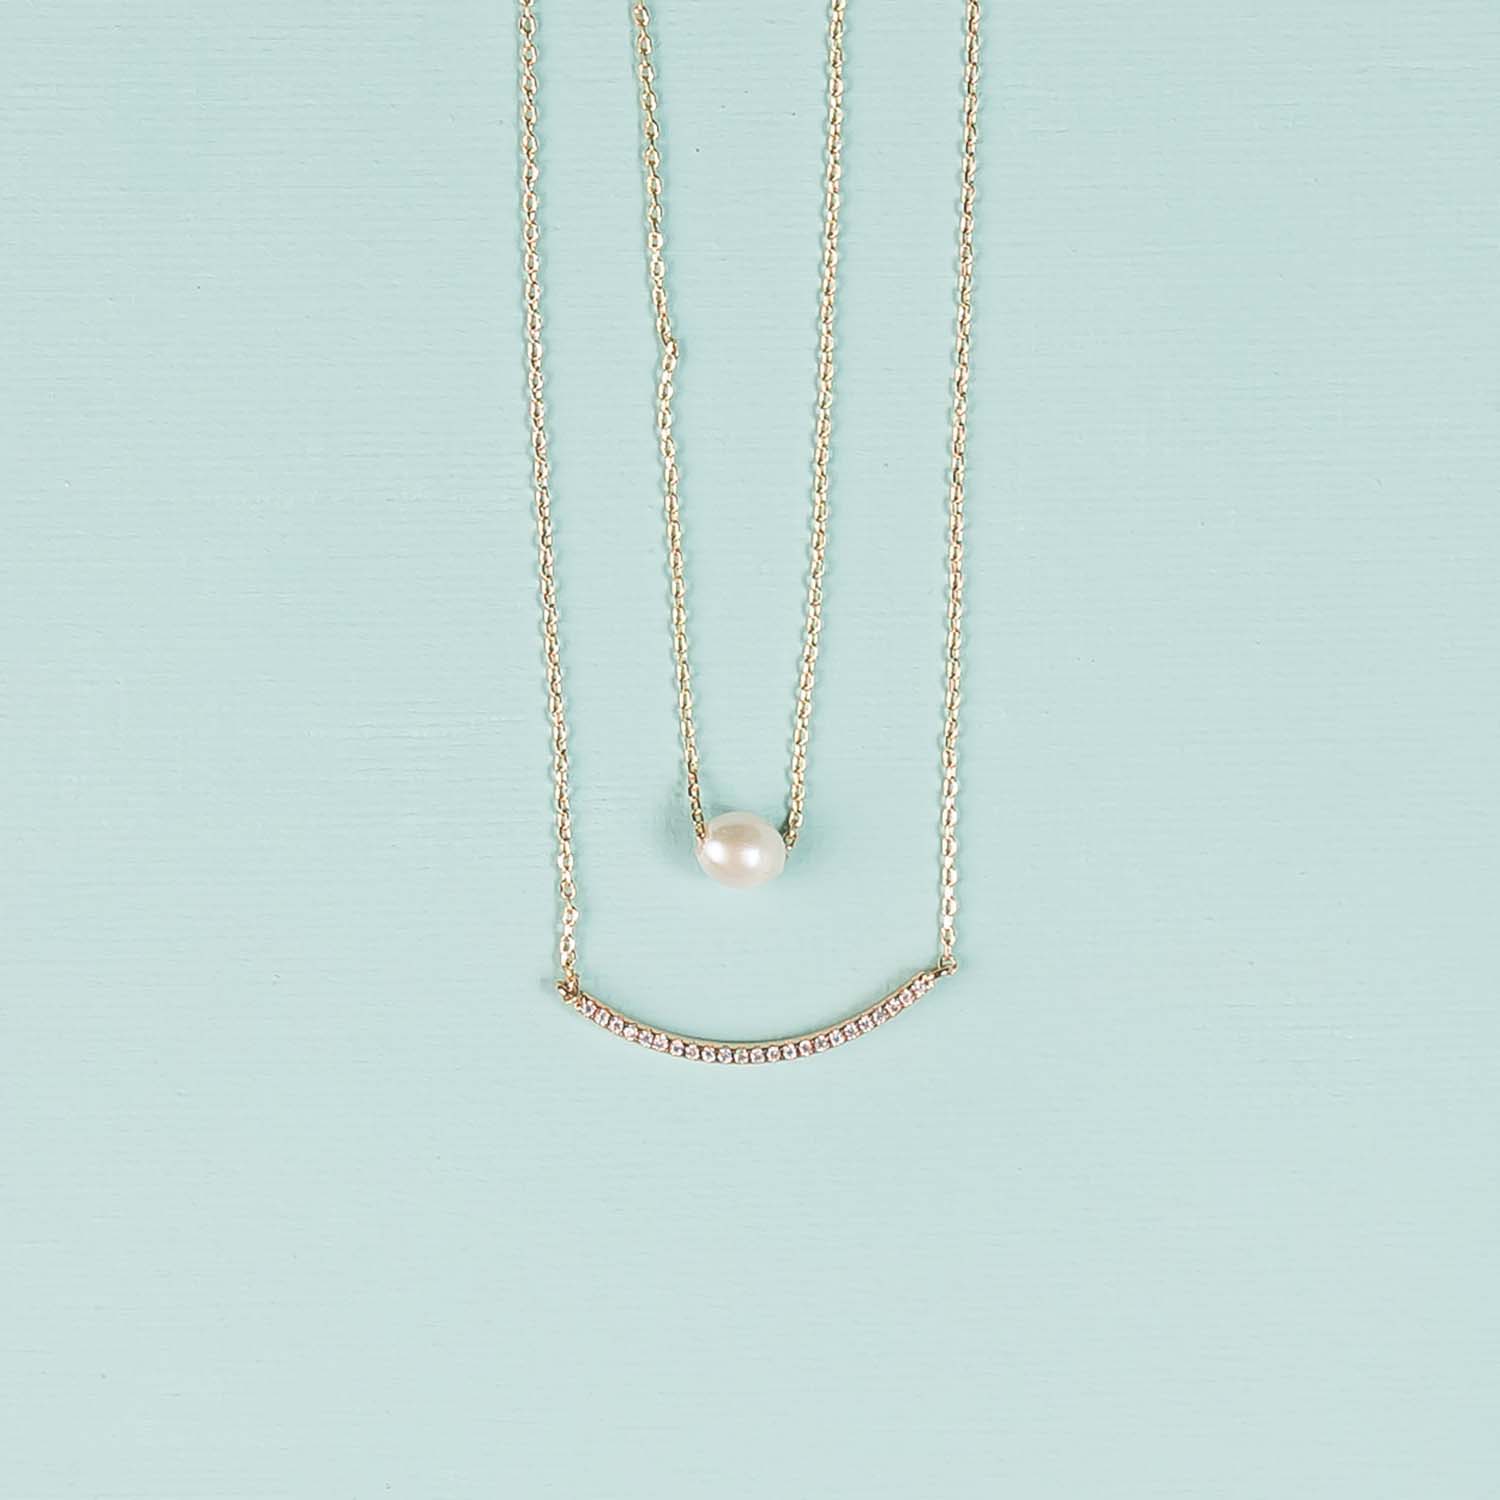 Rosa Necklace – MICHELLE MCDOWELL